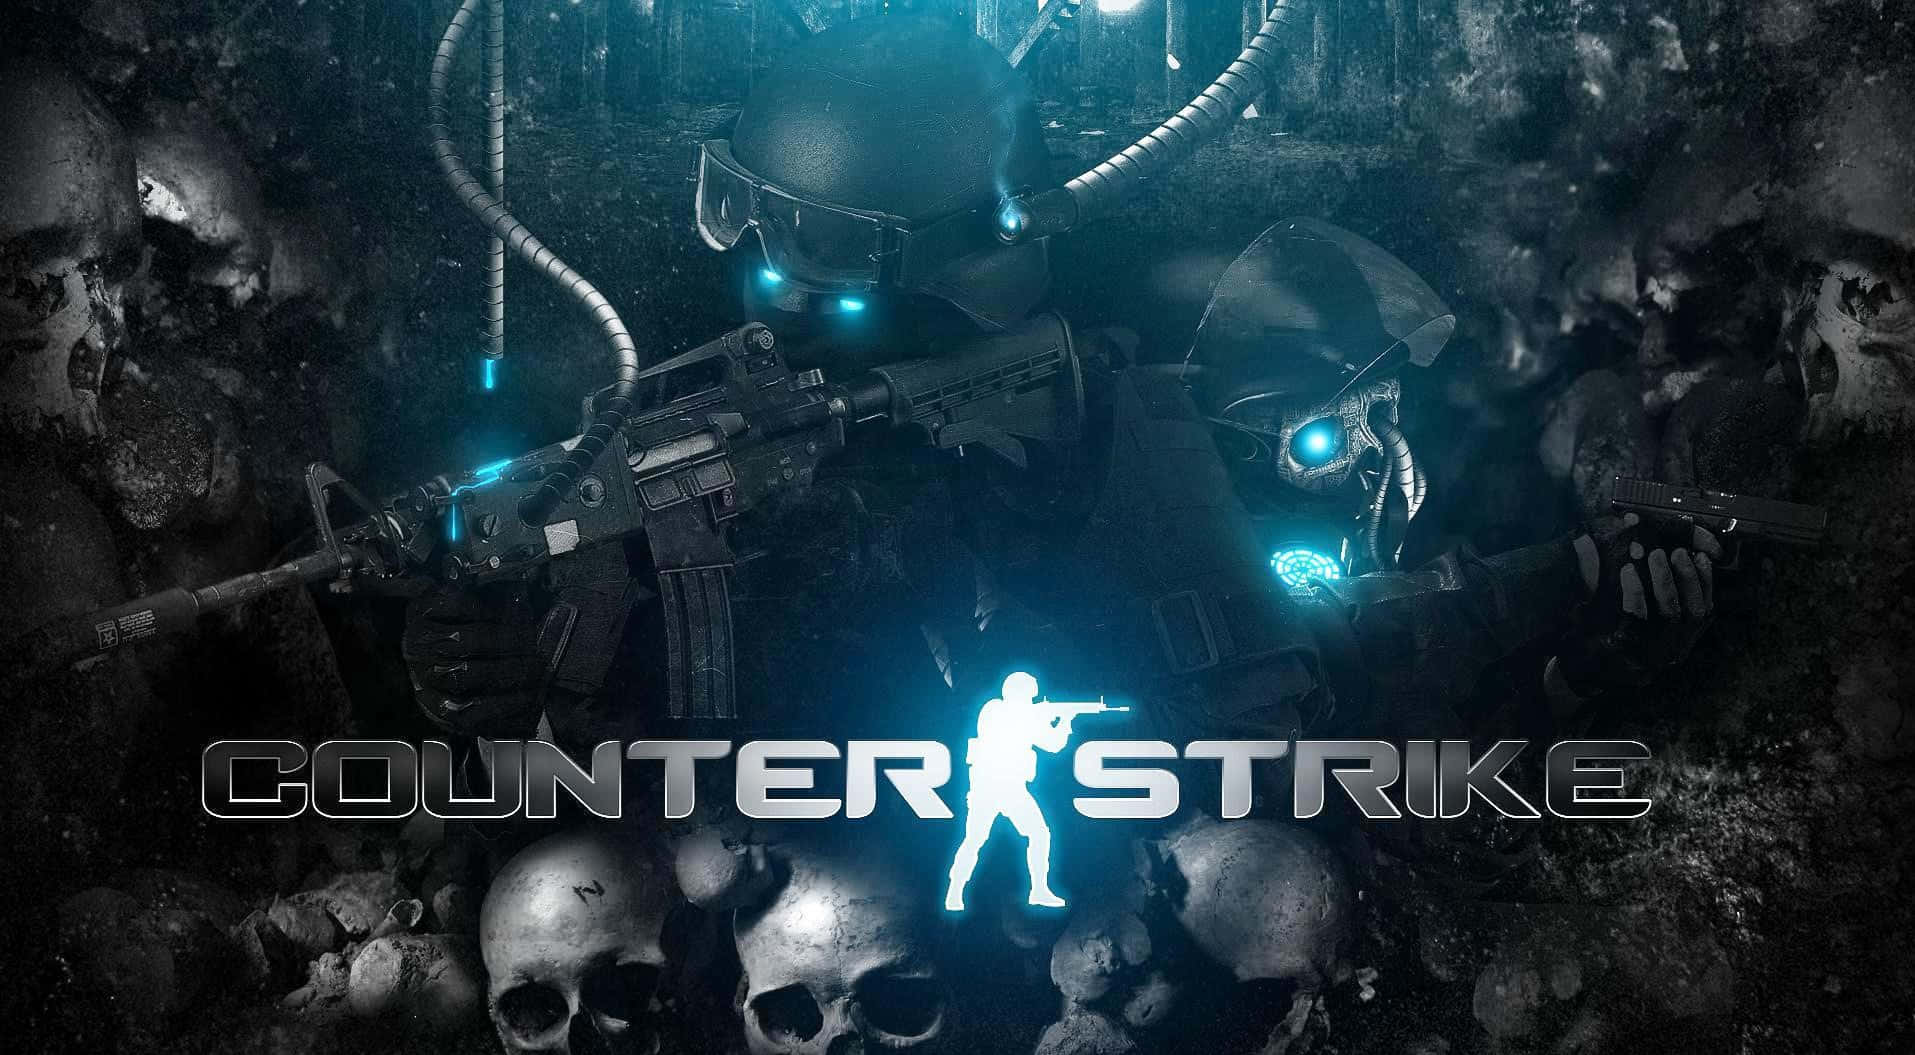 Take on Counter-Strike Global Offensive challenges with intense gaming action!